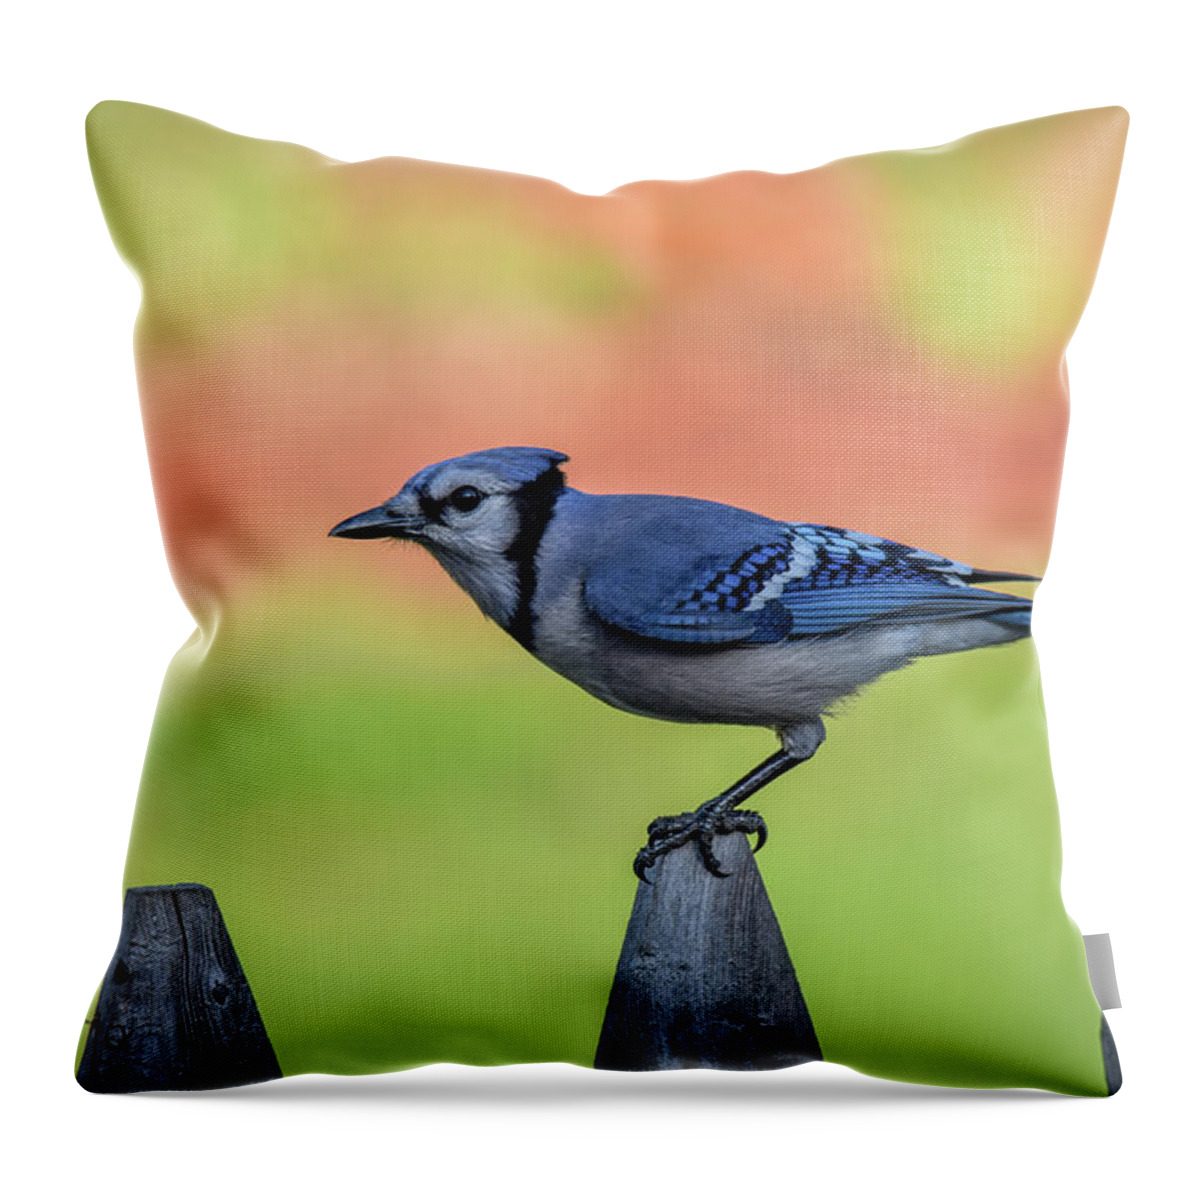 Blue Jay Throw Pillow featuring the photograph Blue Jay by Michelle Wittensoldner